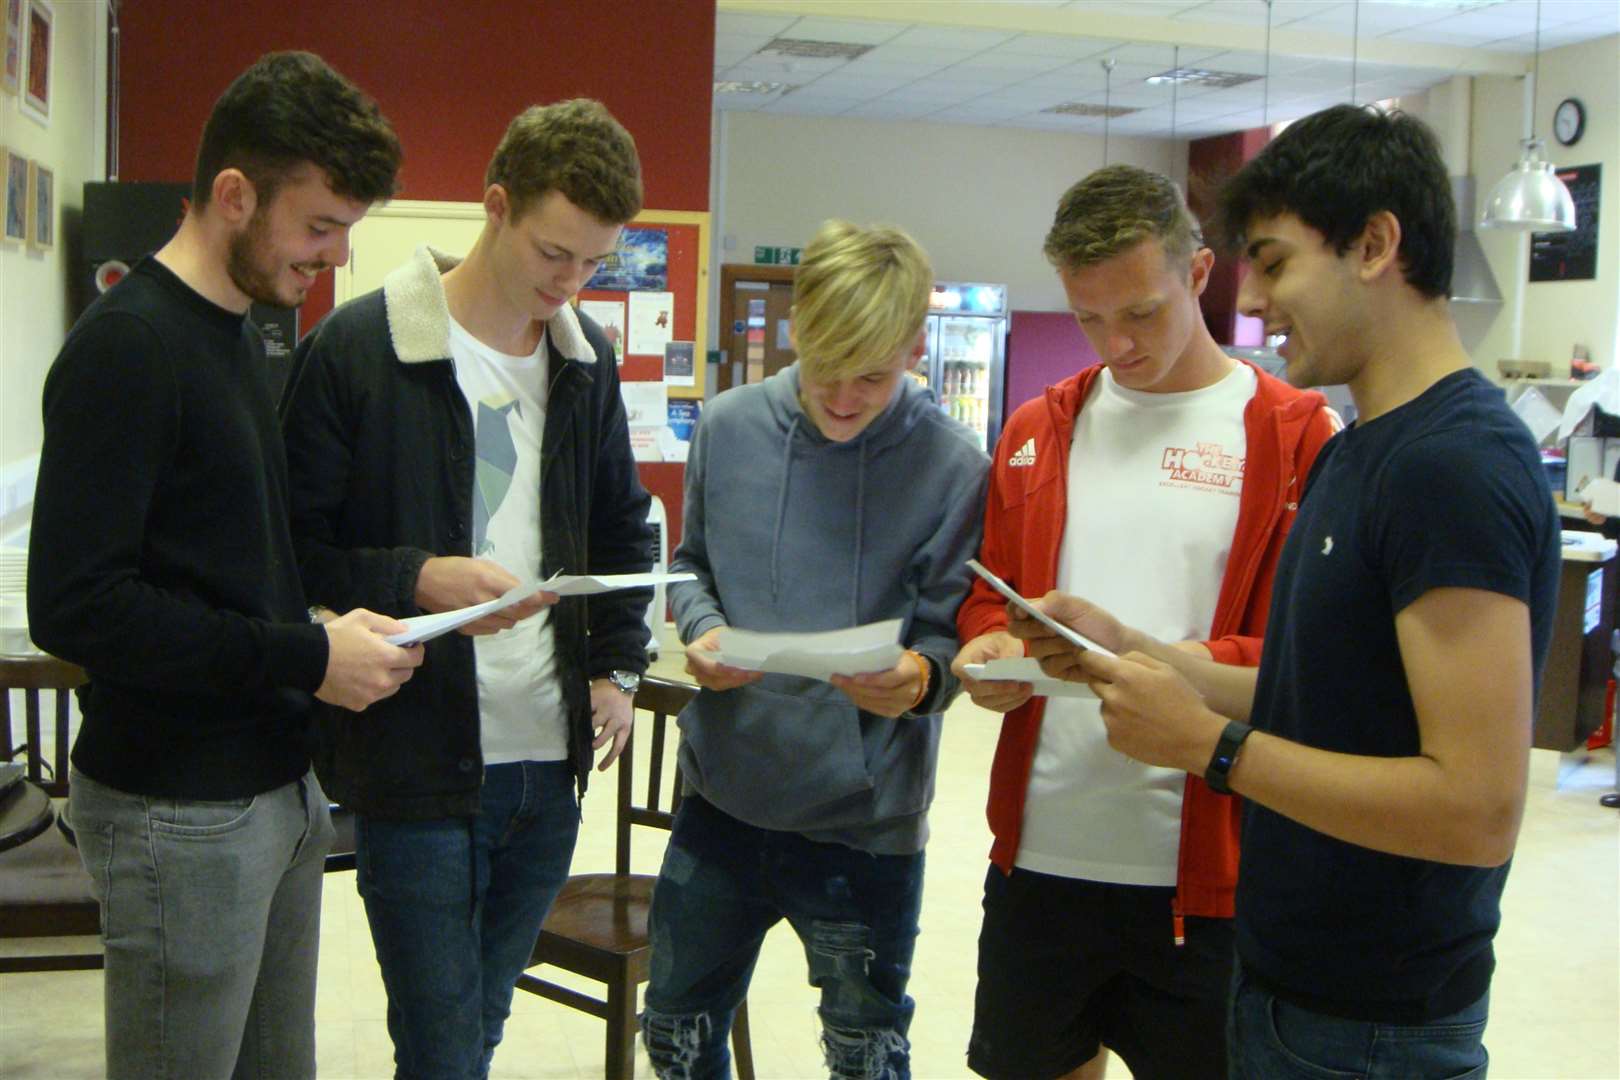 Jamie Stagg, George Heming, Ronnie Skelton, Jack Valentine and Henry Bartlett opening their results